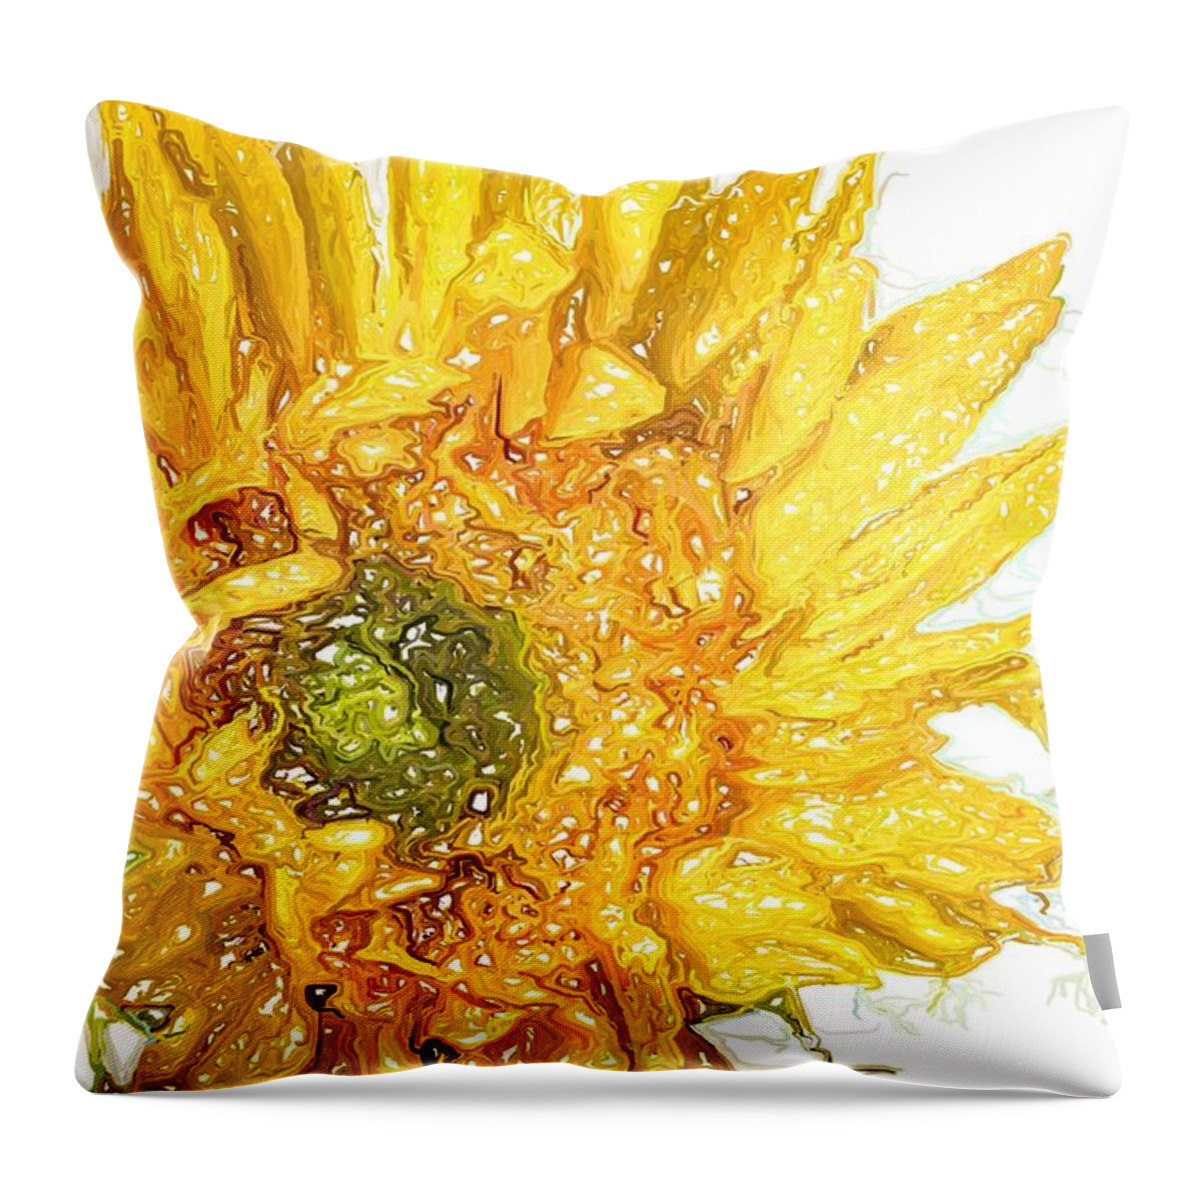  Throw Pillow featuring the photograph Wild Flower Two by Heidi Smith